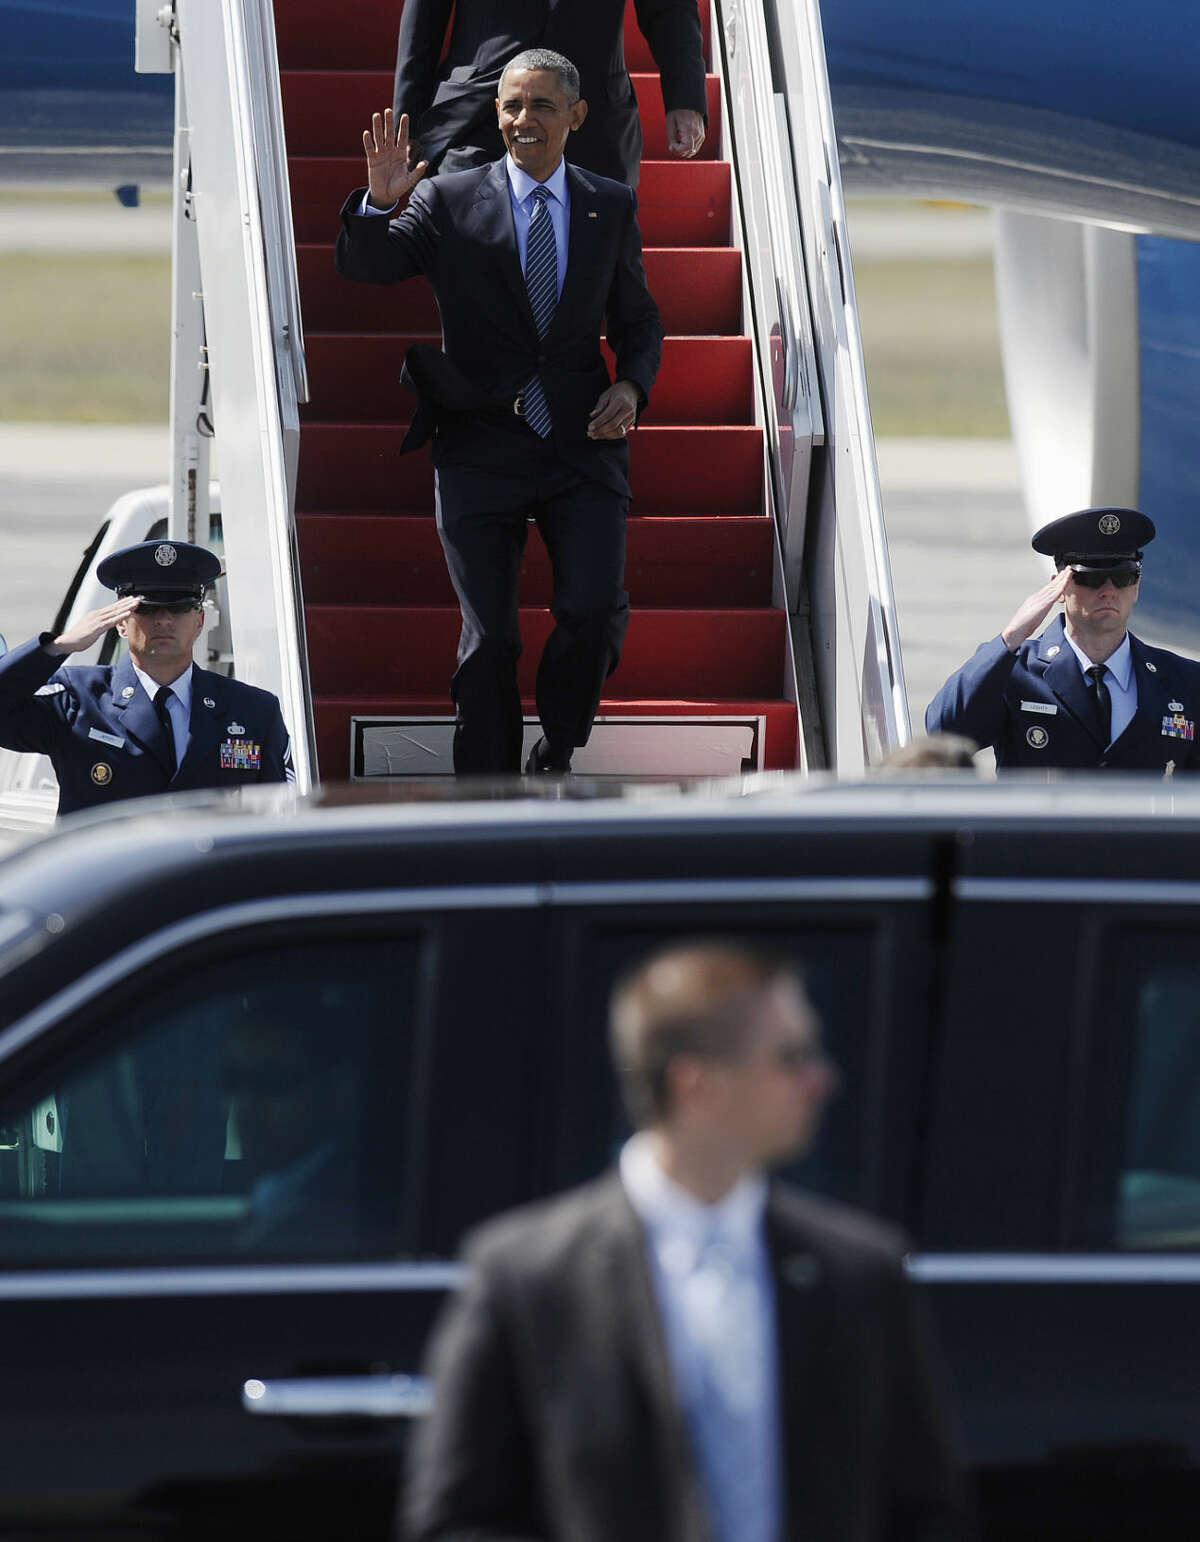 President Barack Obama waves as he arrives on Air Force One at Groton-New London Airport, Wednesday, May 20, 2015, in Groton, Conn. before giving the commencement address at the Coast Guard Academy. (AP Photo/Jessica Hill)